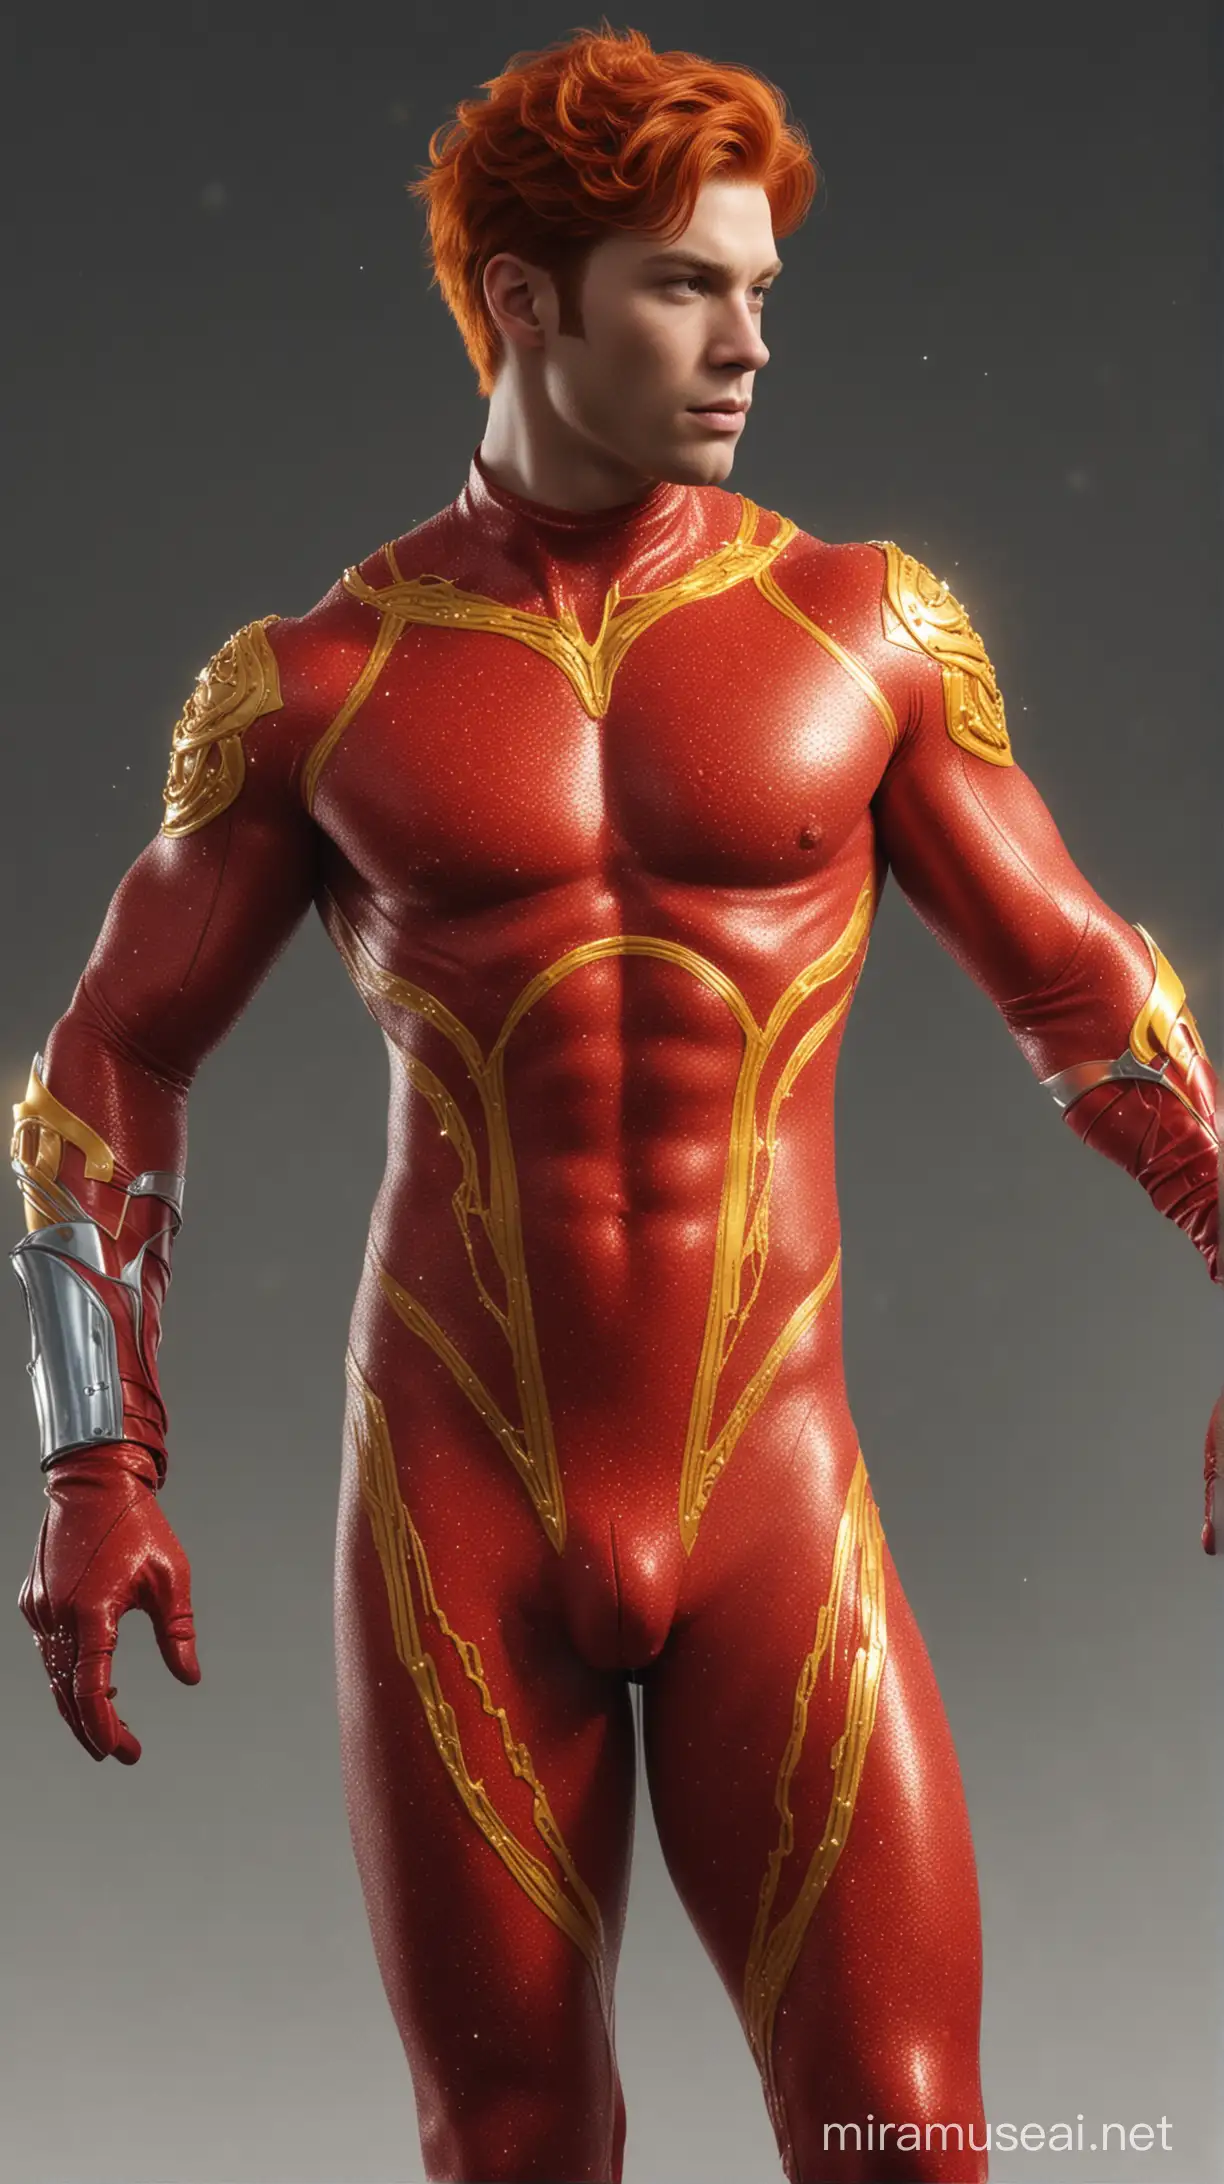  Full full body photorealistic ultra realism high definition aesthetic stabilized diffusion picture of handsome hunky fractal clean shaven red haired Zayne as celestial ren, wearing red and yellow wave sparkling biomorphic transparent overall tight fit spandex and gloves..